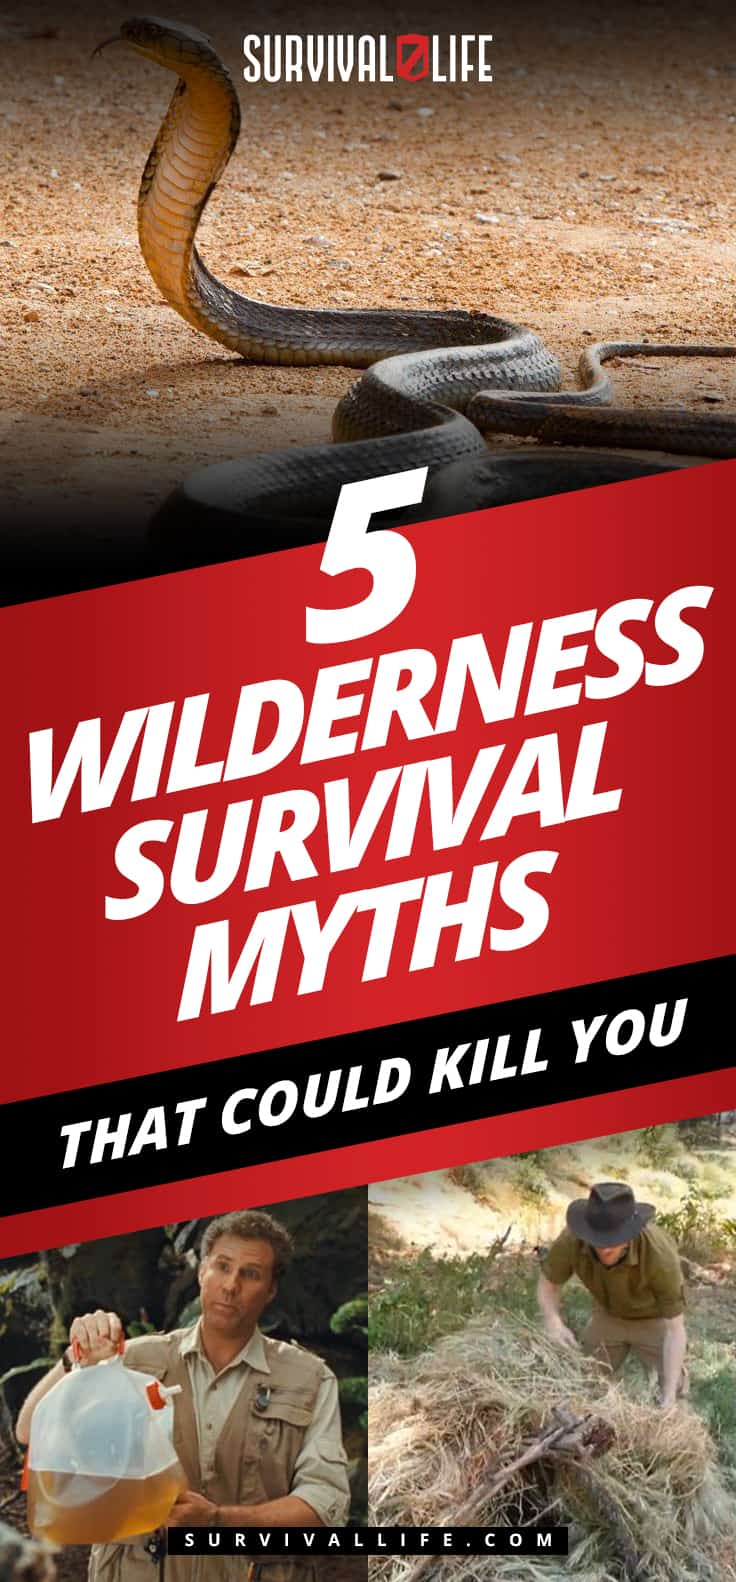 Placard | Wilderness Survival Myths That Could Kill You